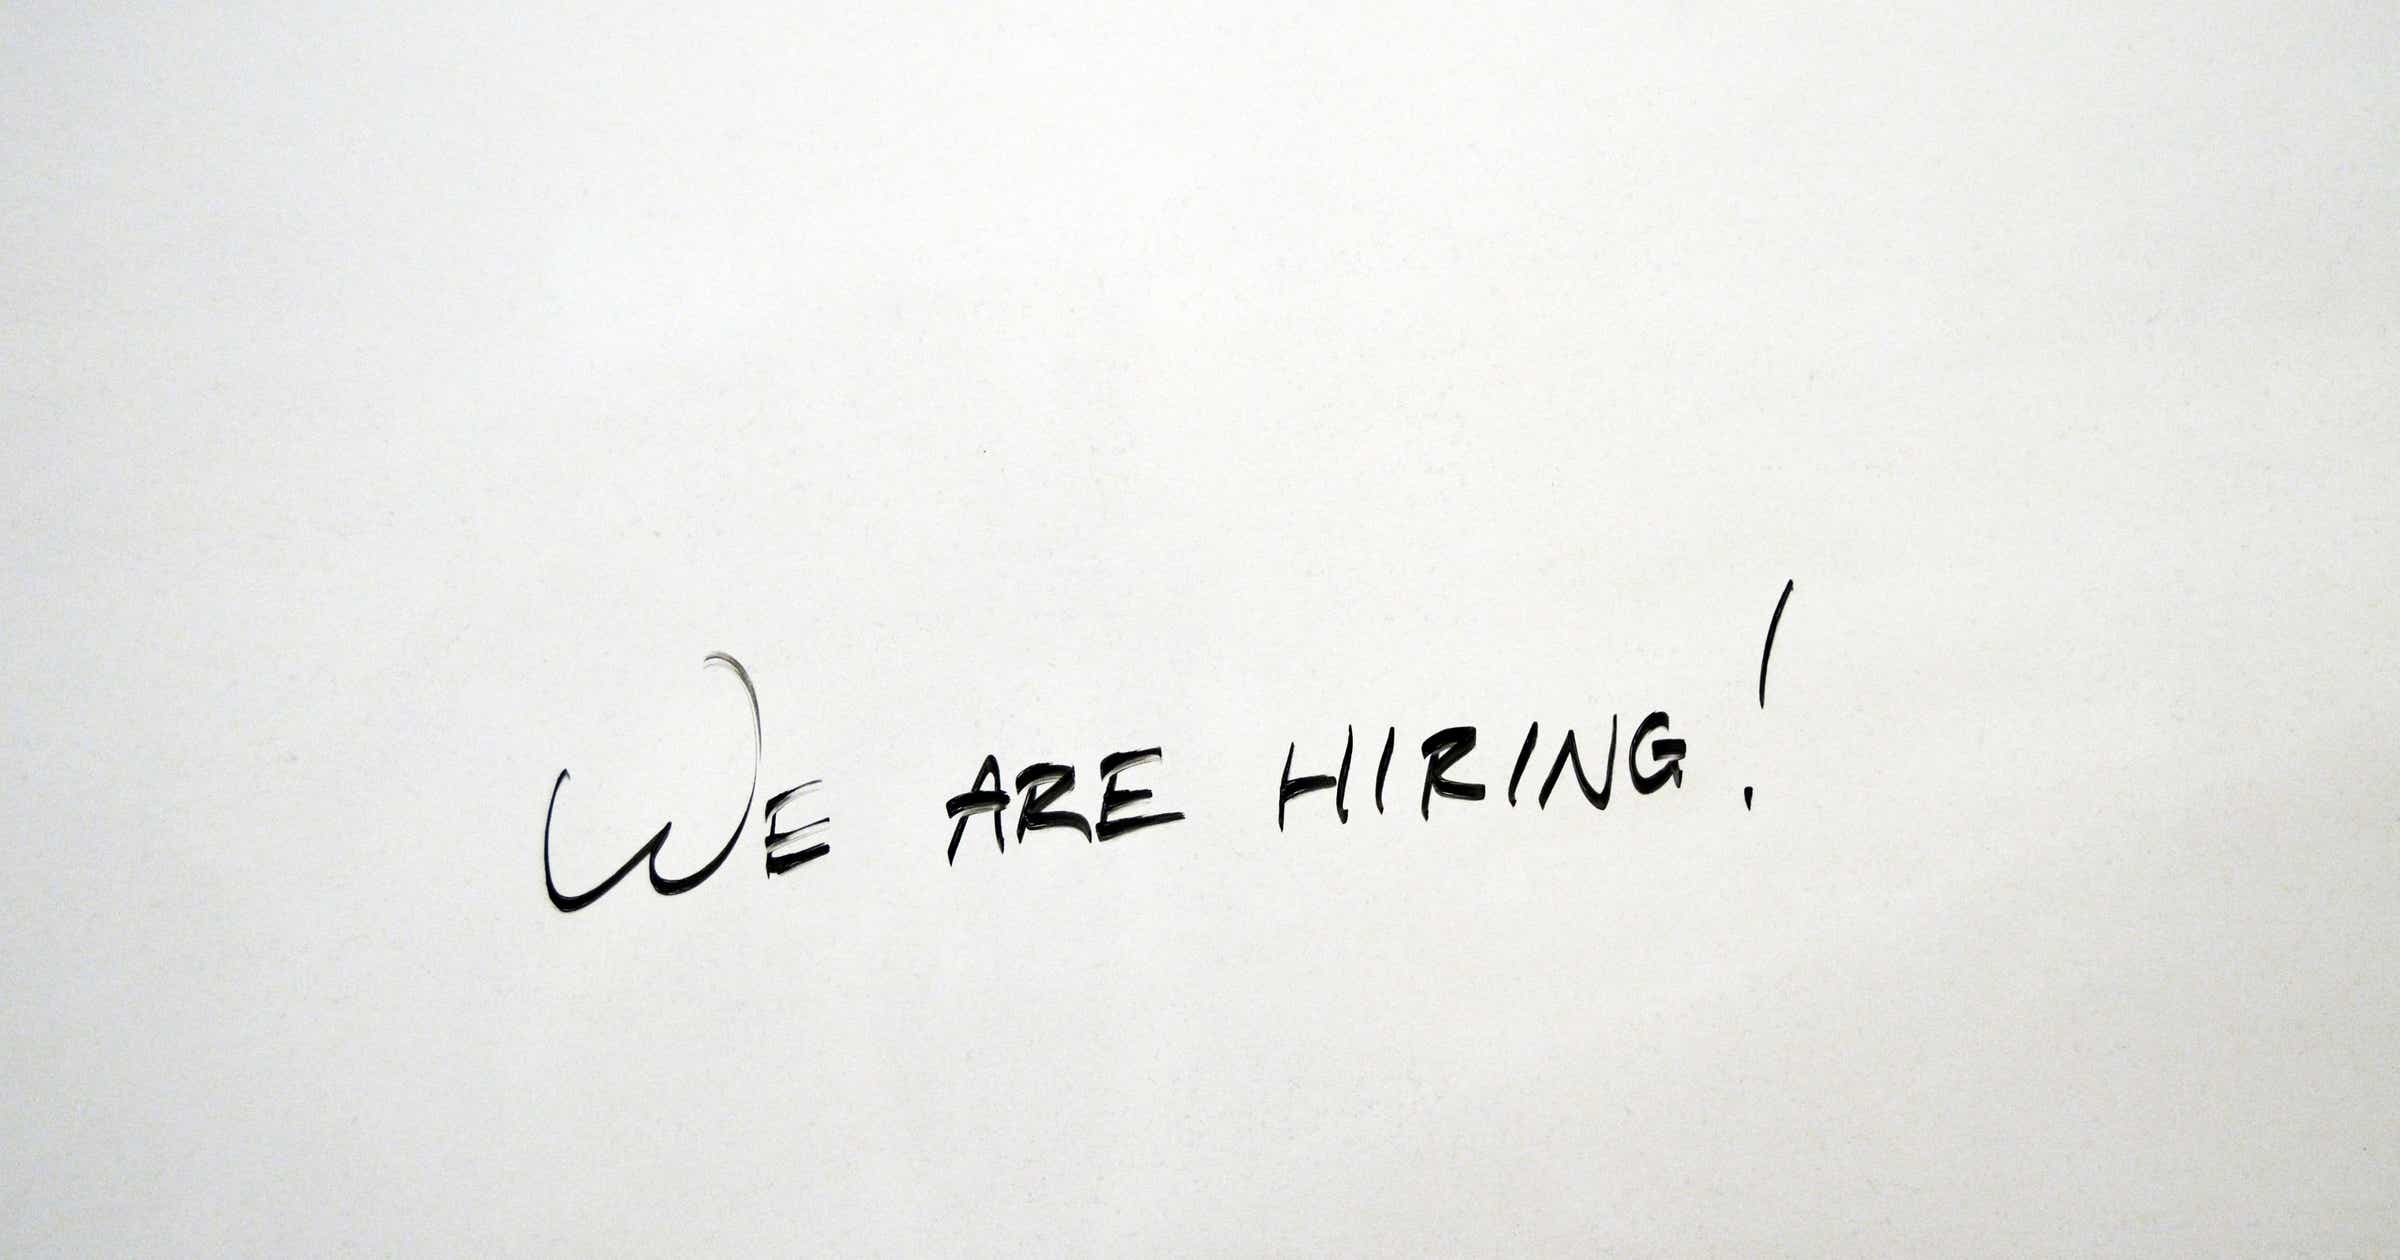 We Are Hiring 2400x2400 20201211 